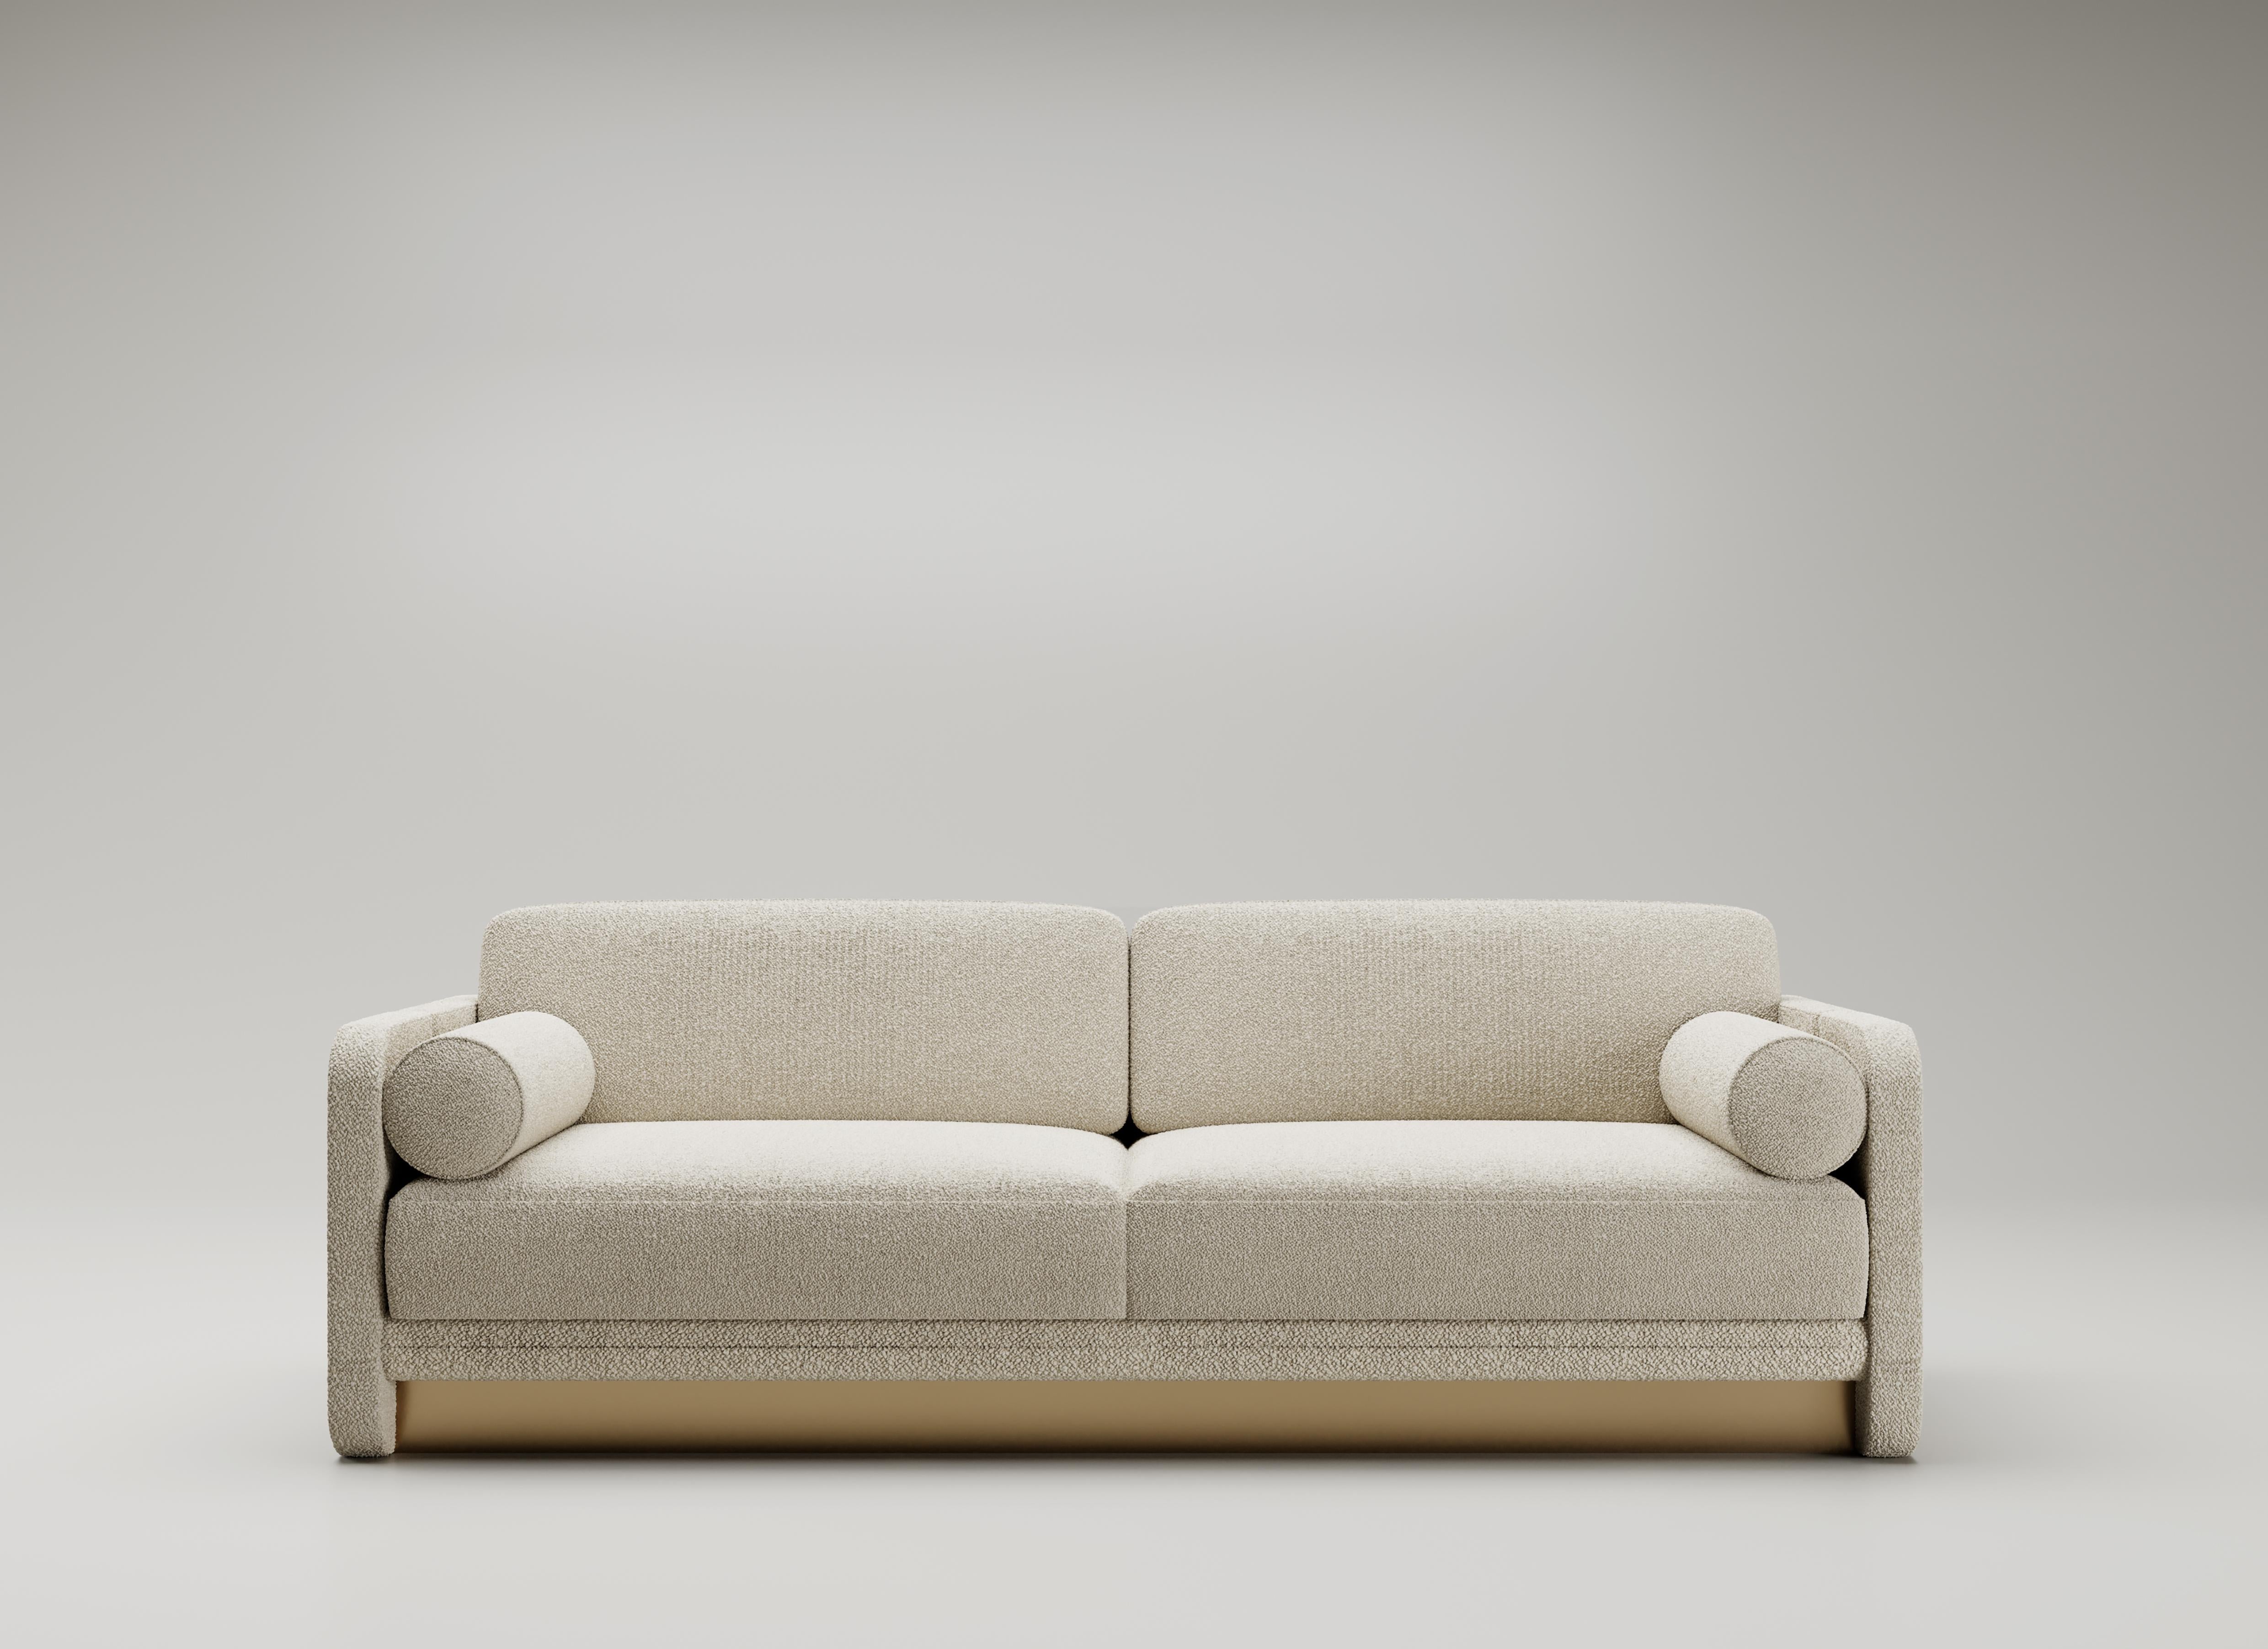 Montenapoleone Sofa by Andrea Bonini
Limited Edition
Dimensions: D 71 x W 220 x H 85 cm.
Materials: Loro Piana fabric and Brass.

Made in Italy. Limited series, numbered and signed pieces. Custom size or finish on request. Different fabrics